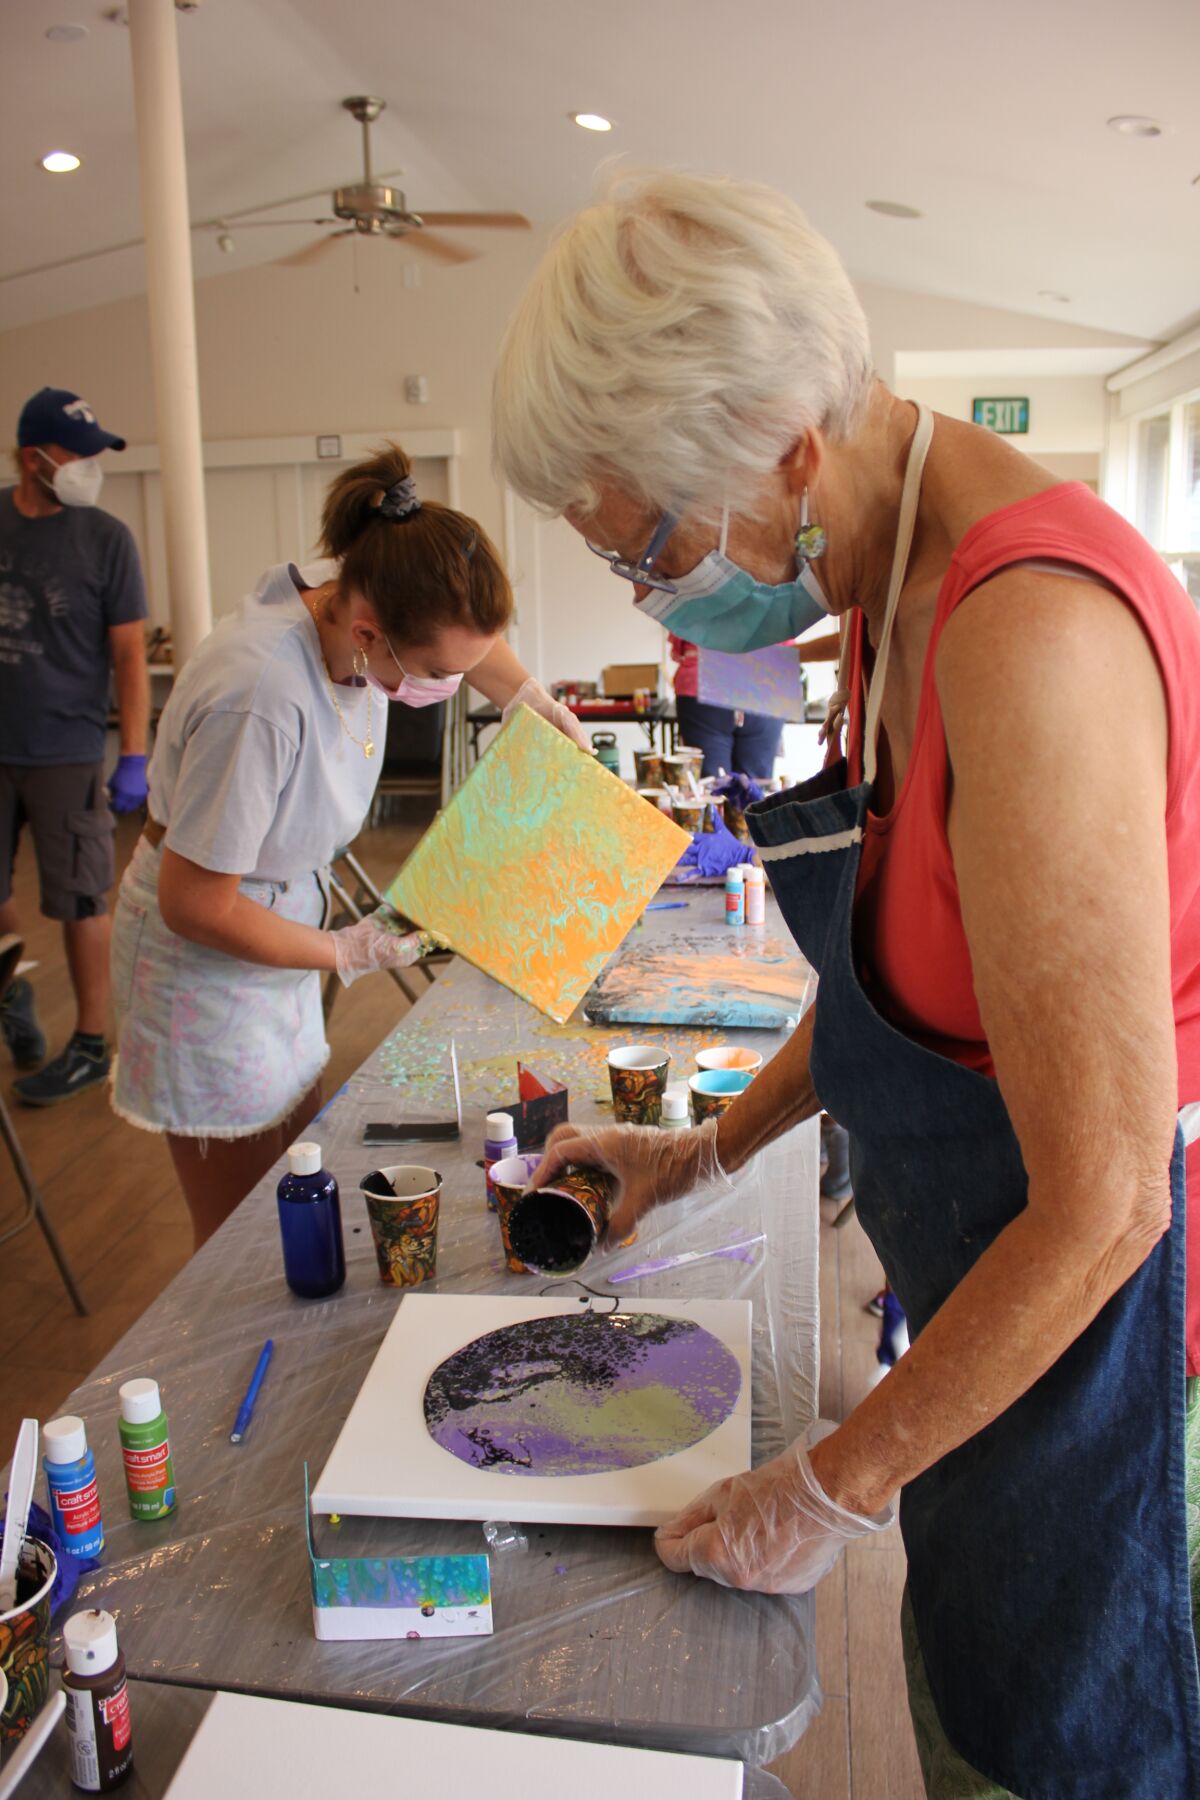 The La Jolla Community Center will present an Acrylic Pour Workshop on Friday, Nov. 18.